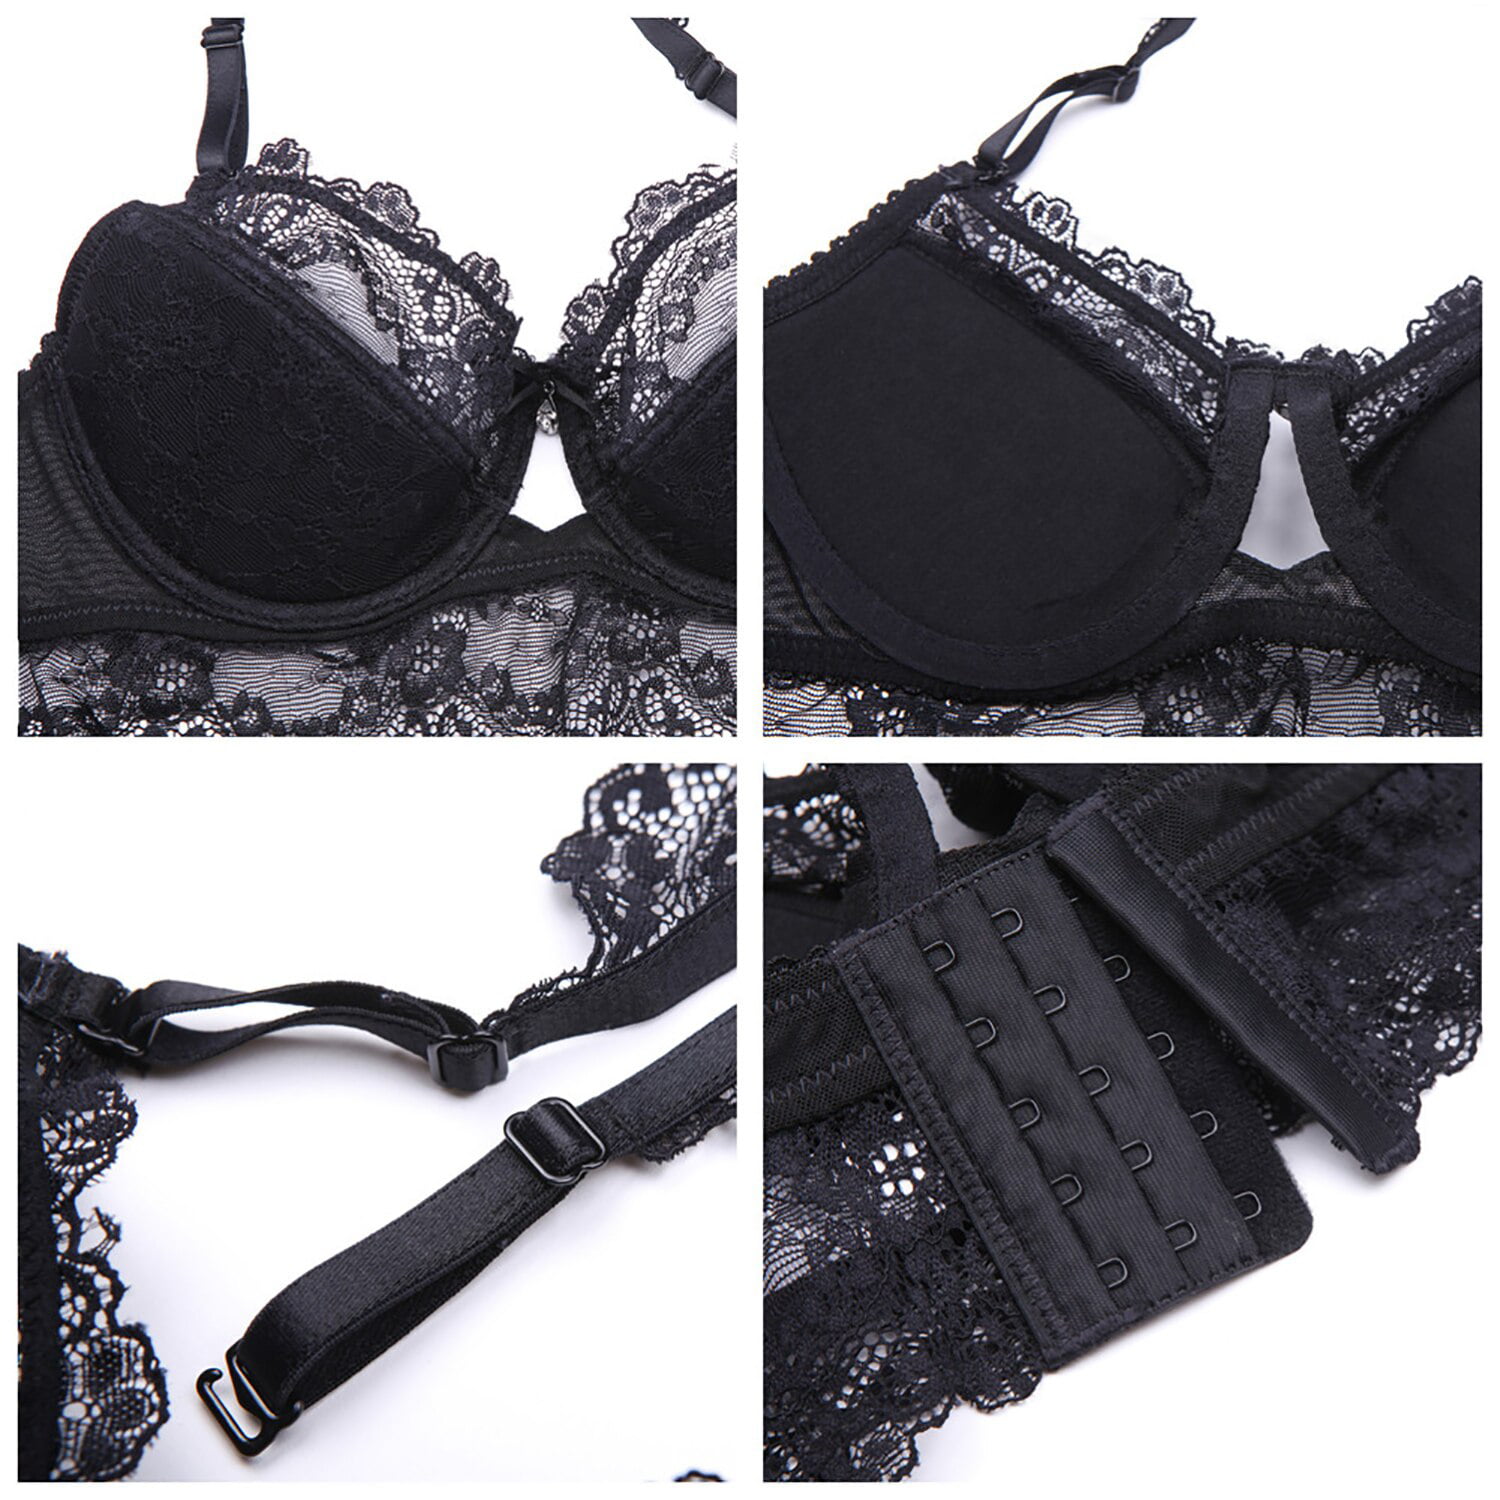 Varsbaby Sexy Lace Padded Push Up Bra Lingerie Sets for Women 